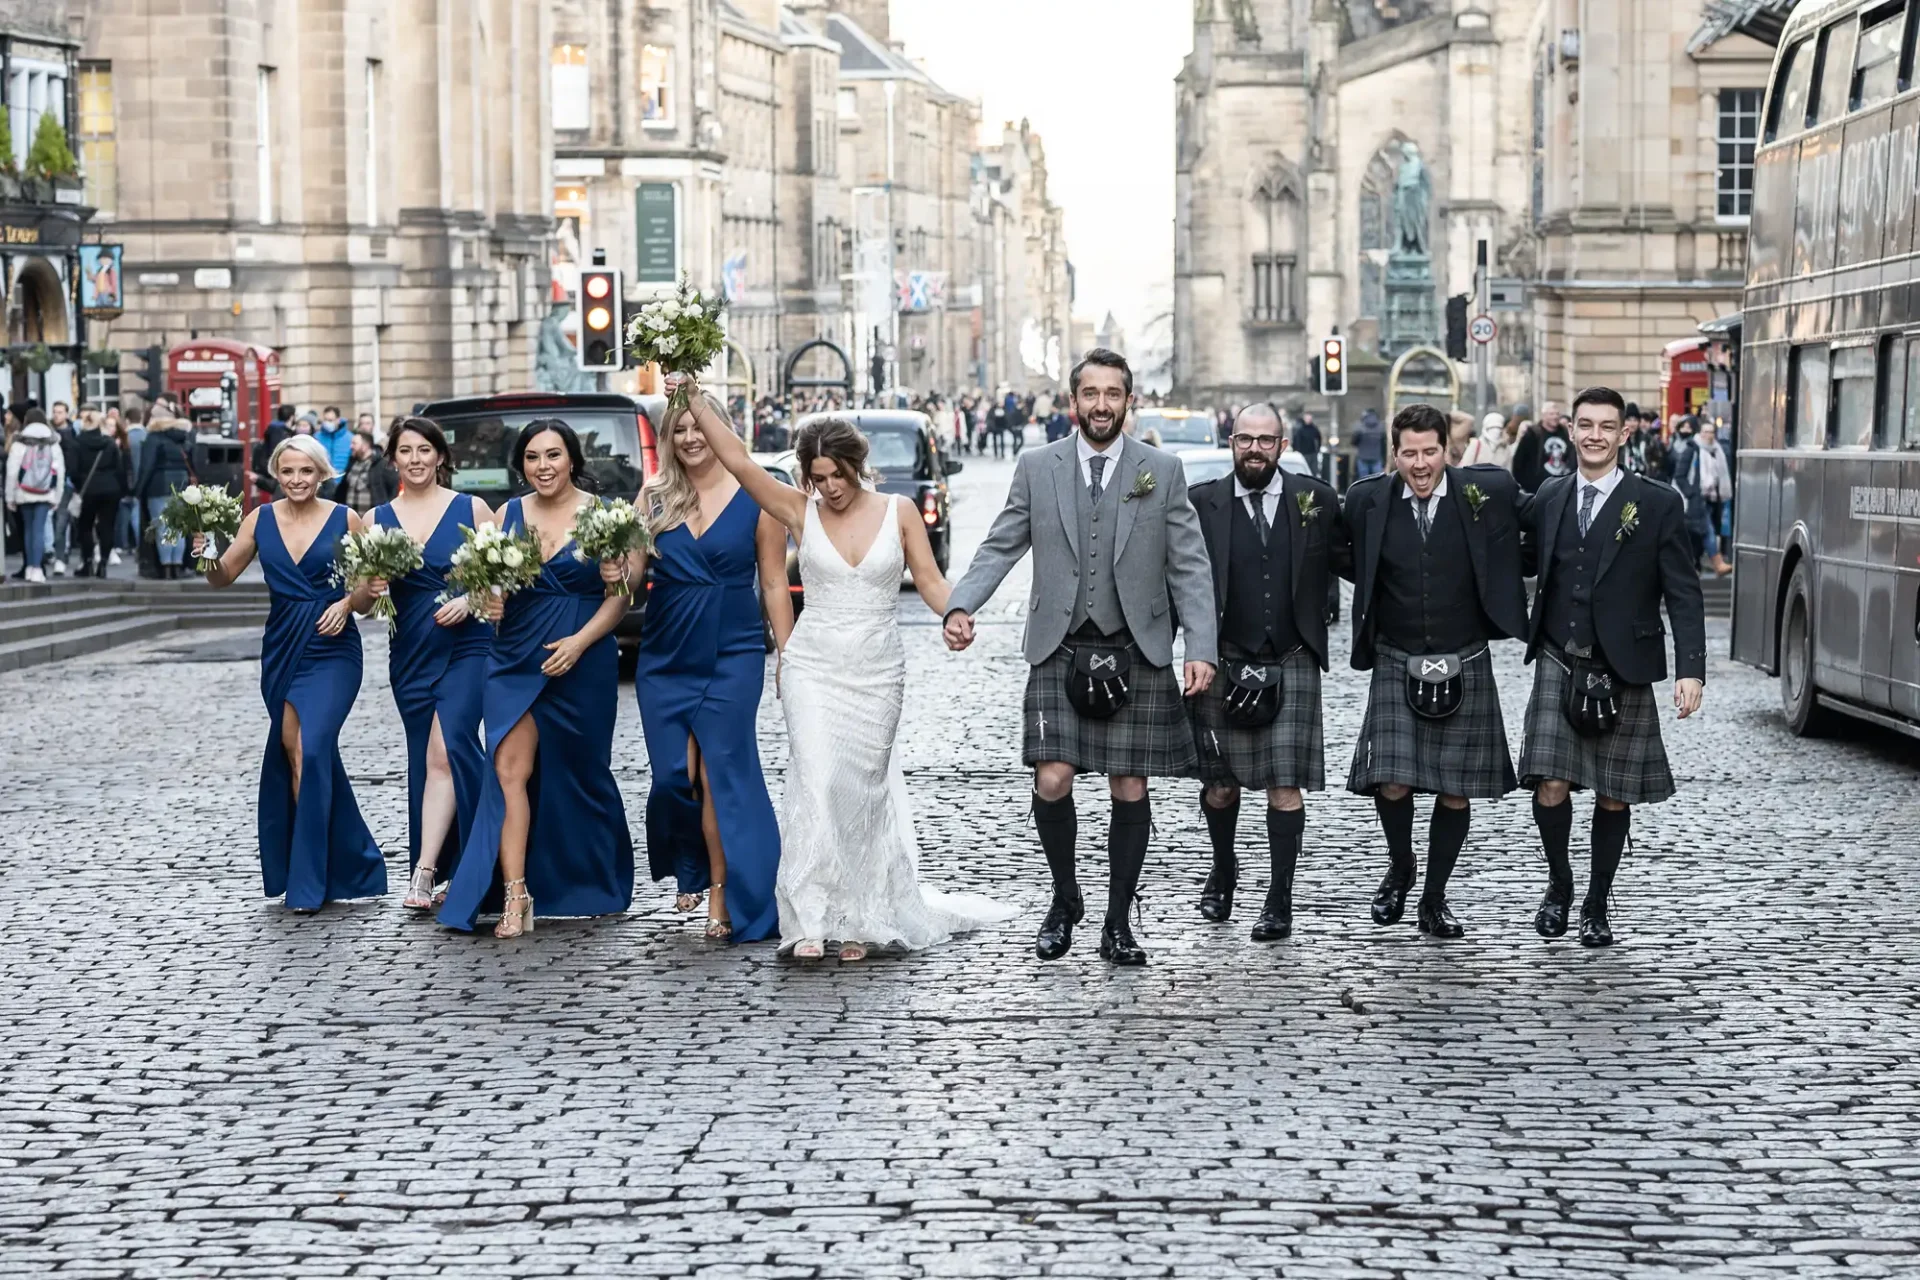 A wedding party, consisting of a bride, groom, and bridesmaids in blue dresses, along with groomsmen in kilts, joyfully walks down a cobblestone street in a city.